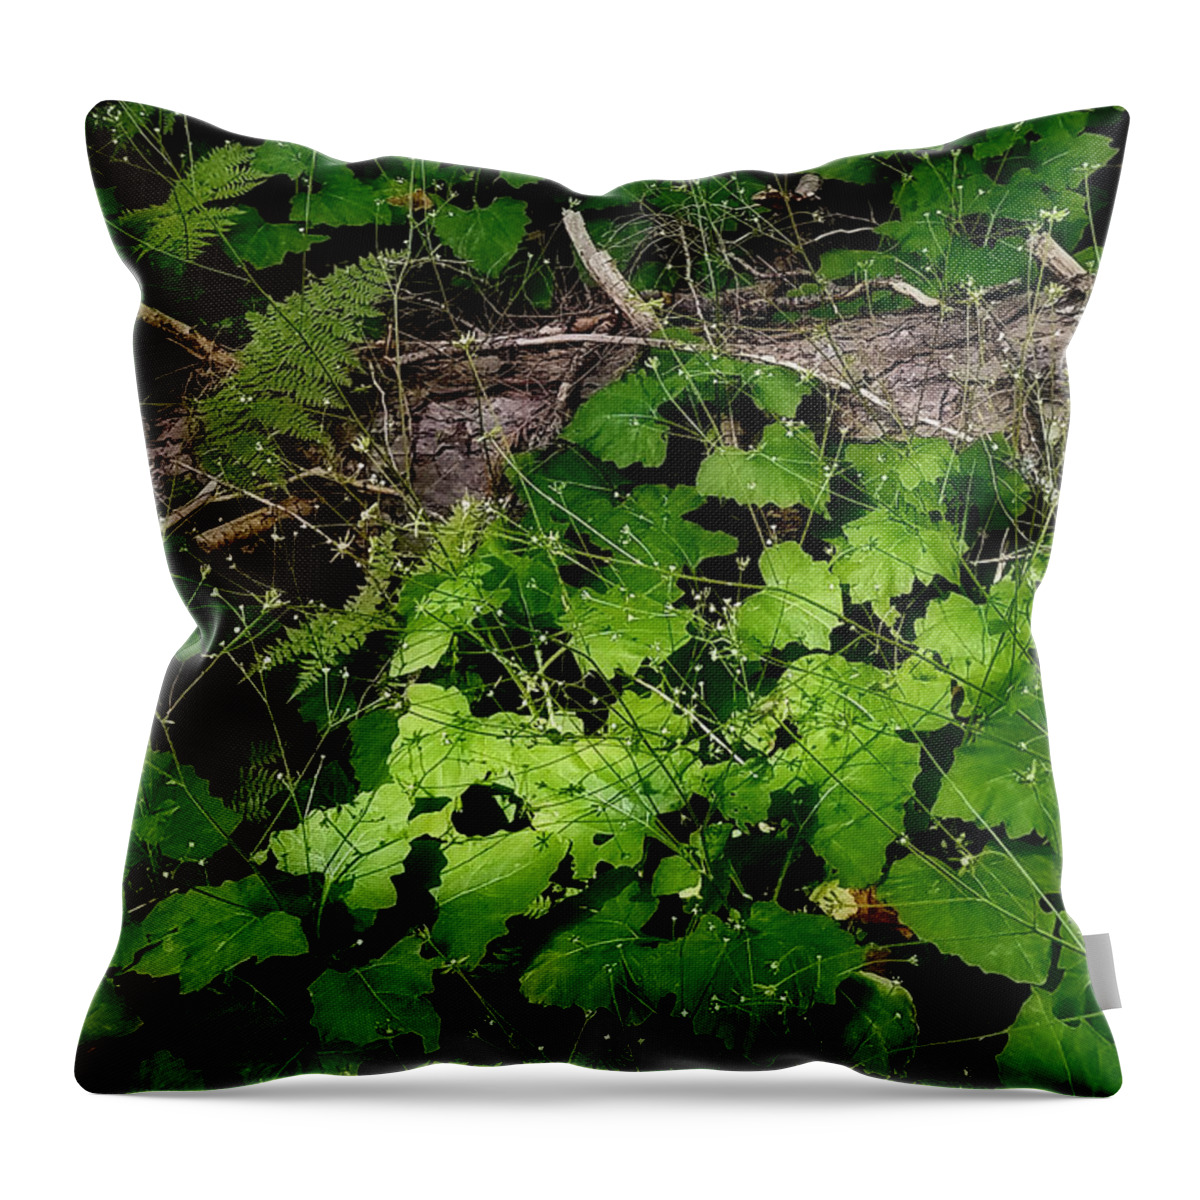 Glacier Park Throw Pillow featuring the digital art Little Things by Susan Kinney